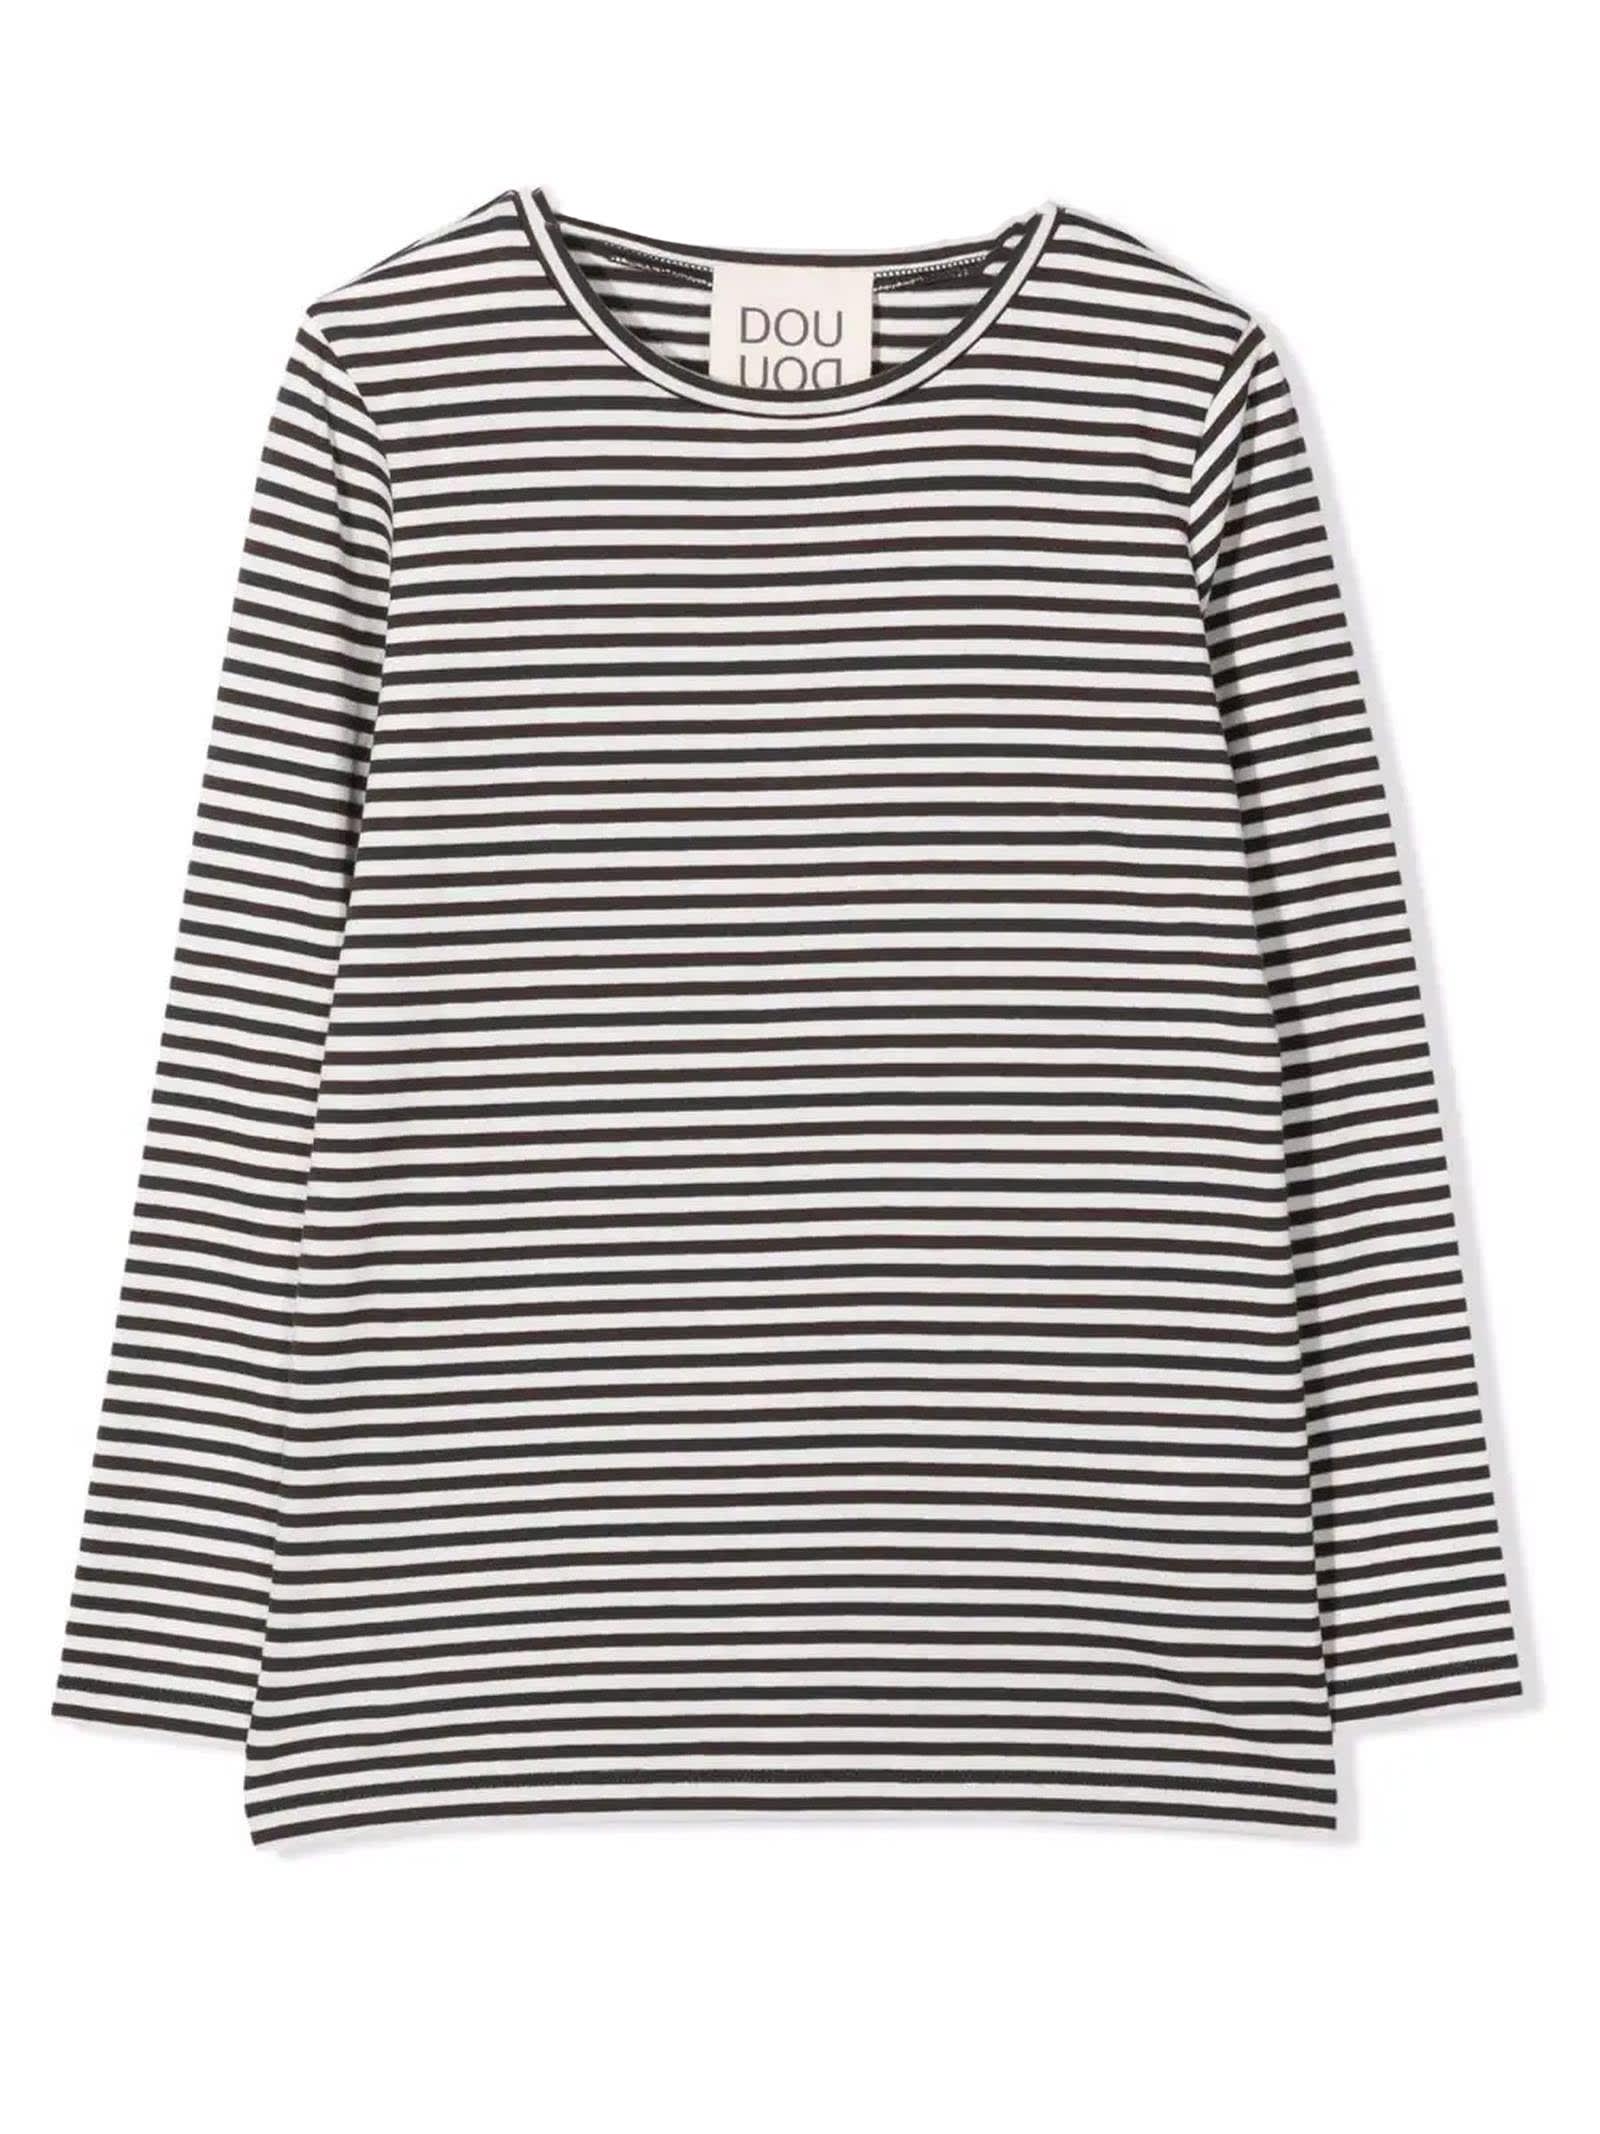 Douuod White And Black Striped T-shirt